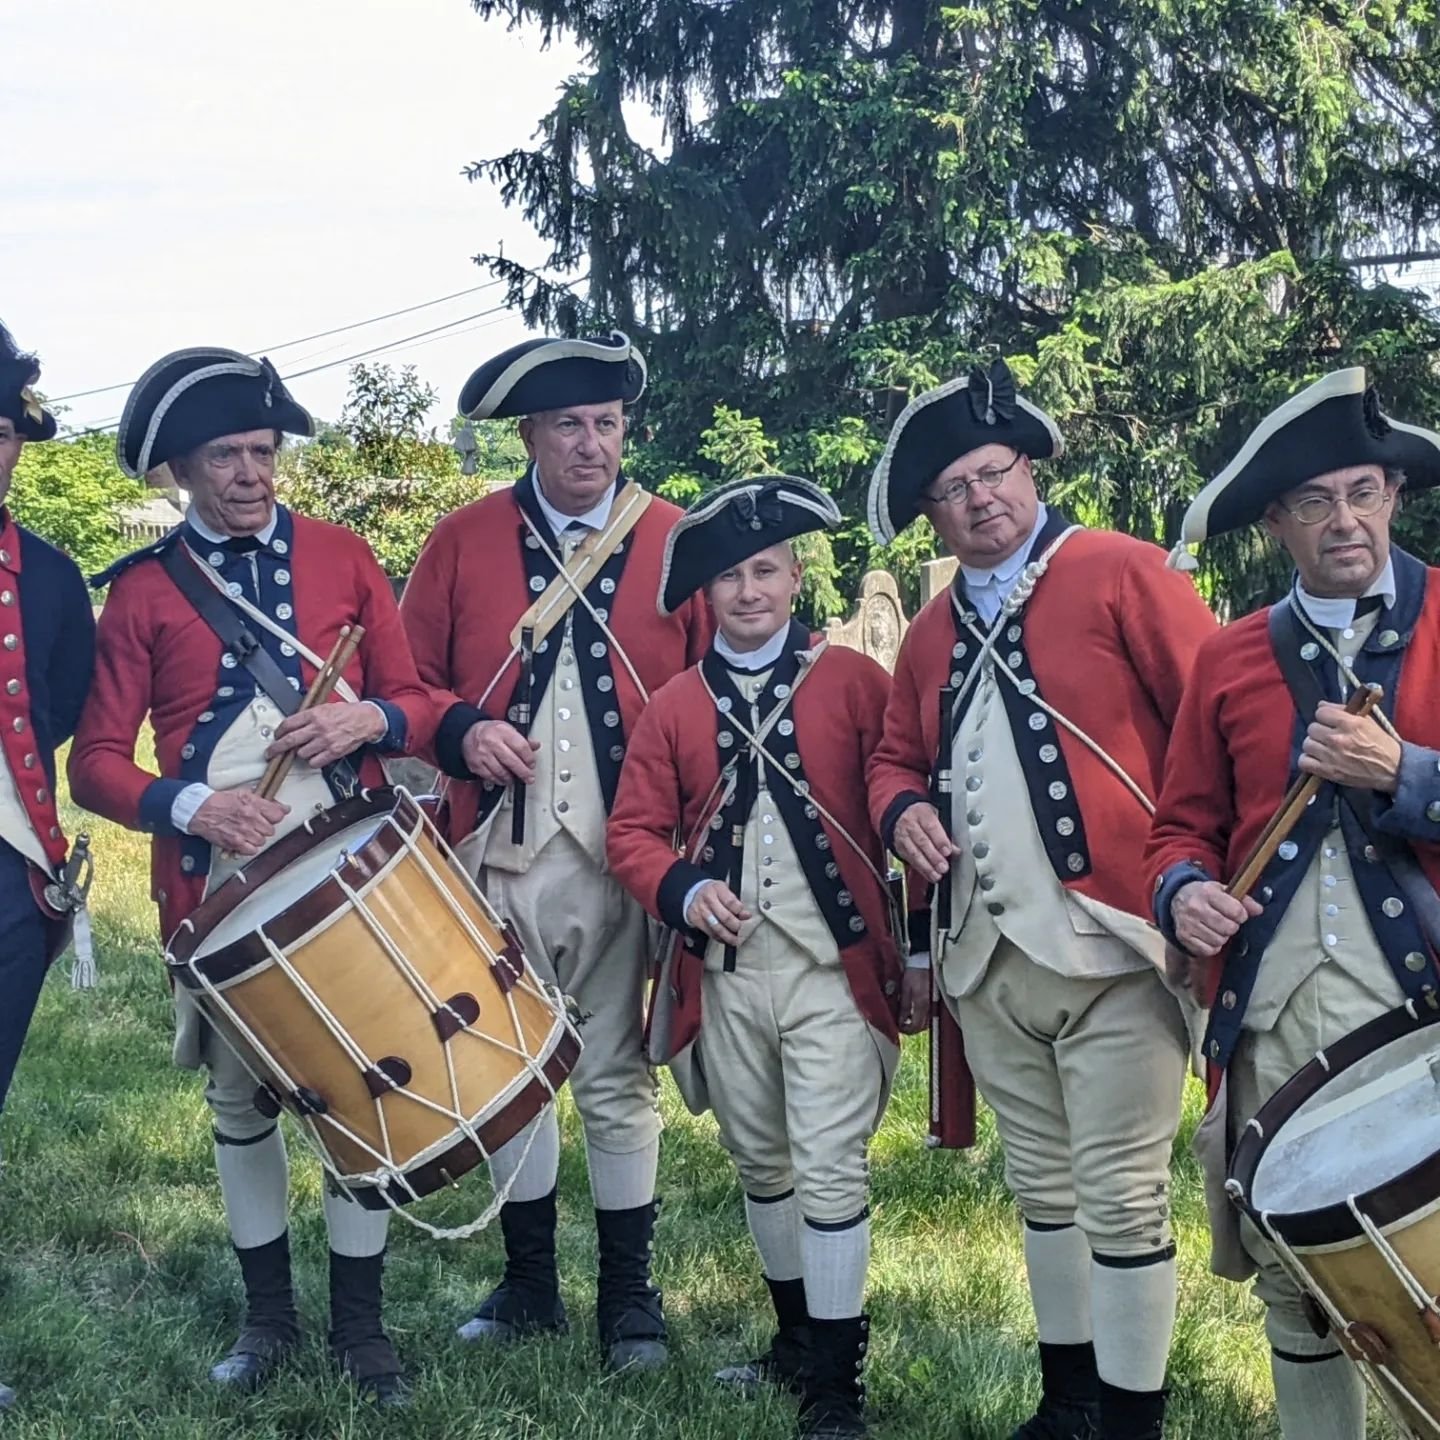 Beautiful day celebrating the life, service, and legacy of Doctor Jabez Campfield in Morristown, NJ 🥁🇺🇲